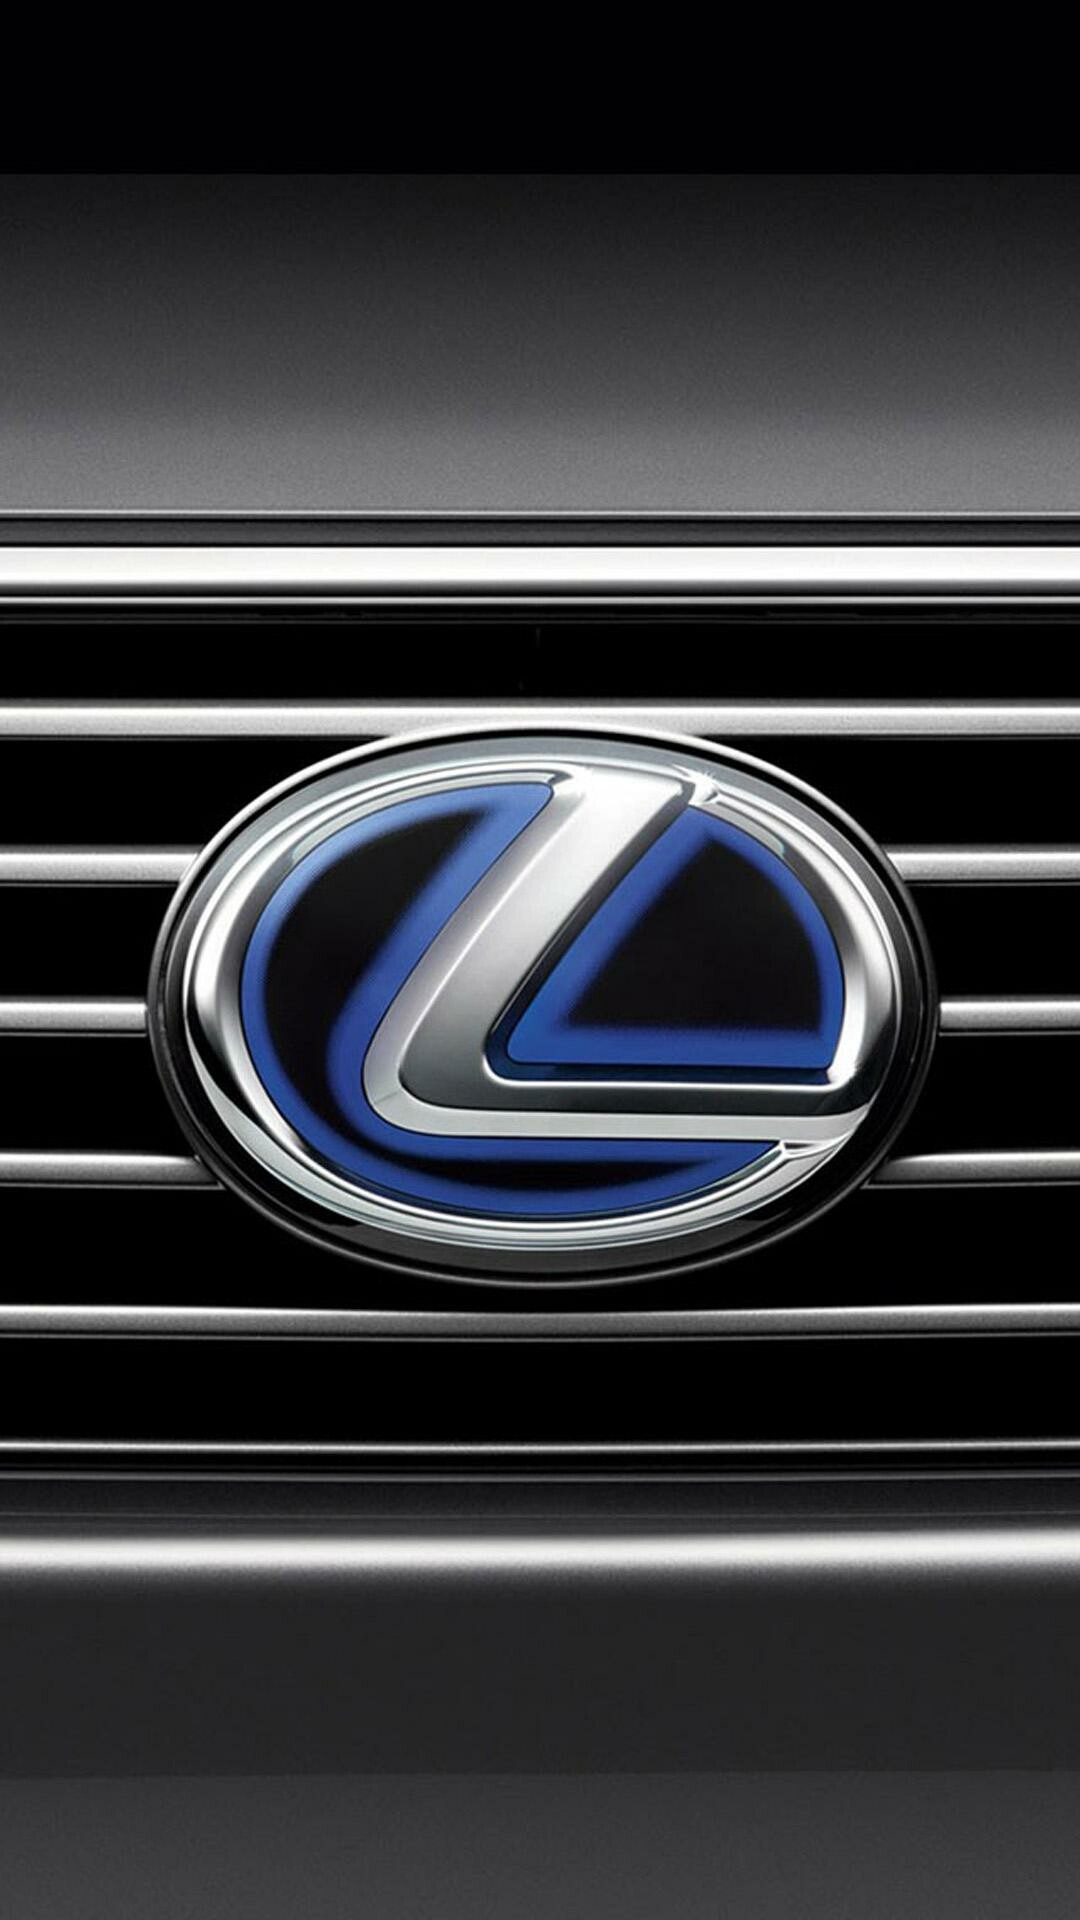 Lexus: Toyota's luxury car division, based out of Nagoya, Japan, Logo. 1080x1920 Full HD Background.